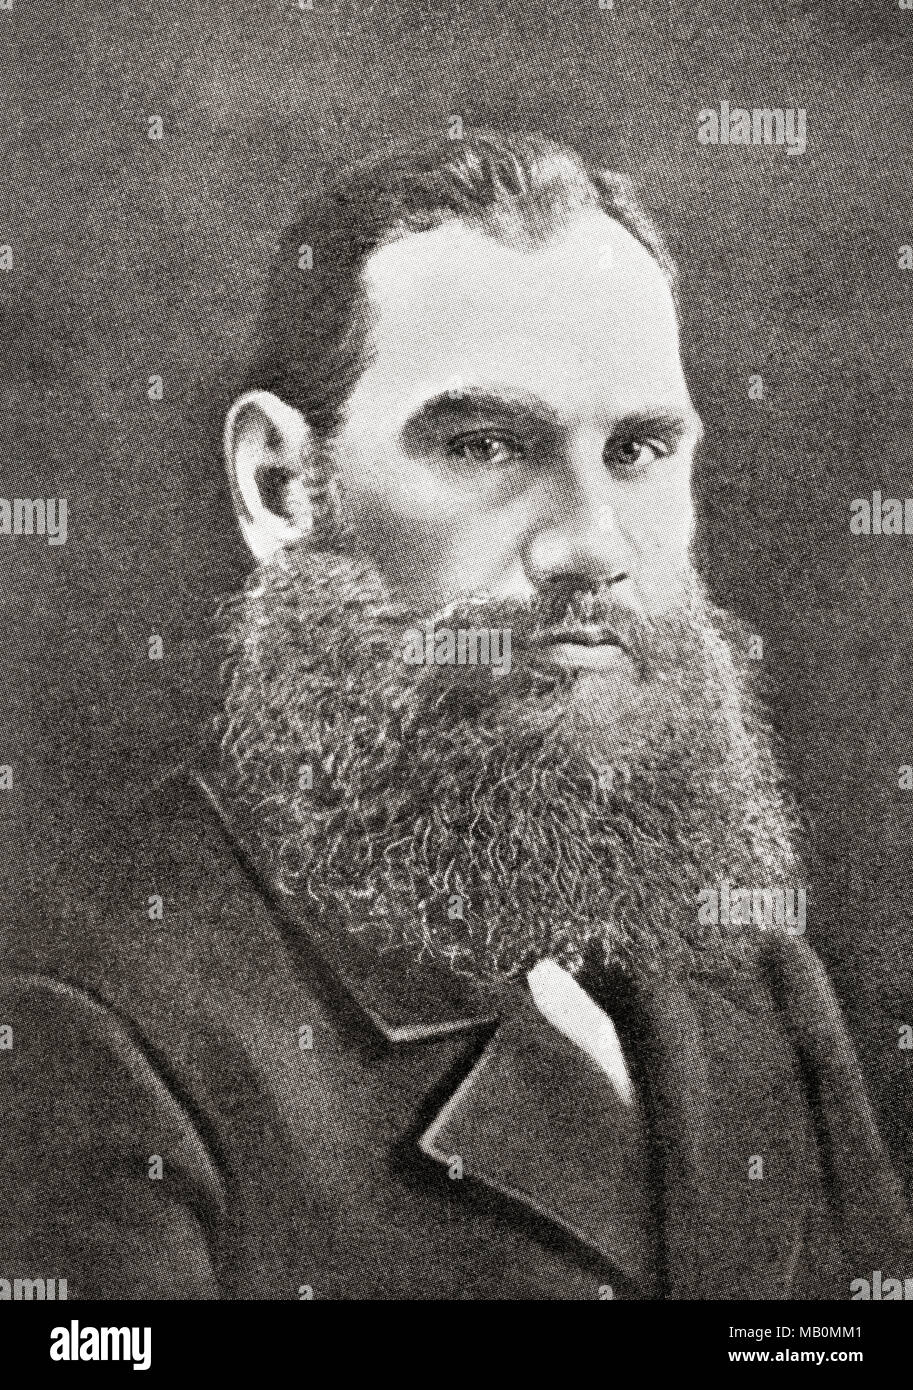 Count Lev Nikolayevich Tolstoy, 1828 – 1910, aka Leo Tolstoy.  Russian writer.  From The International Library of Famous Literature, published c. 1900 Stock Photo